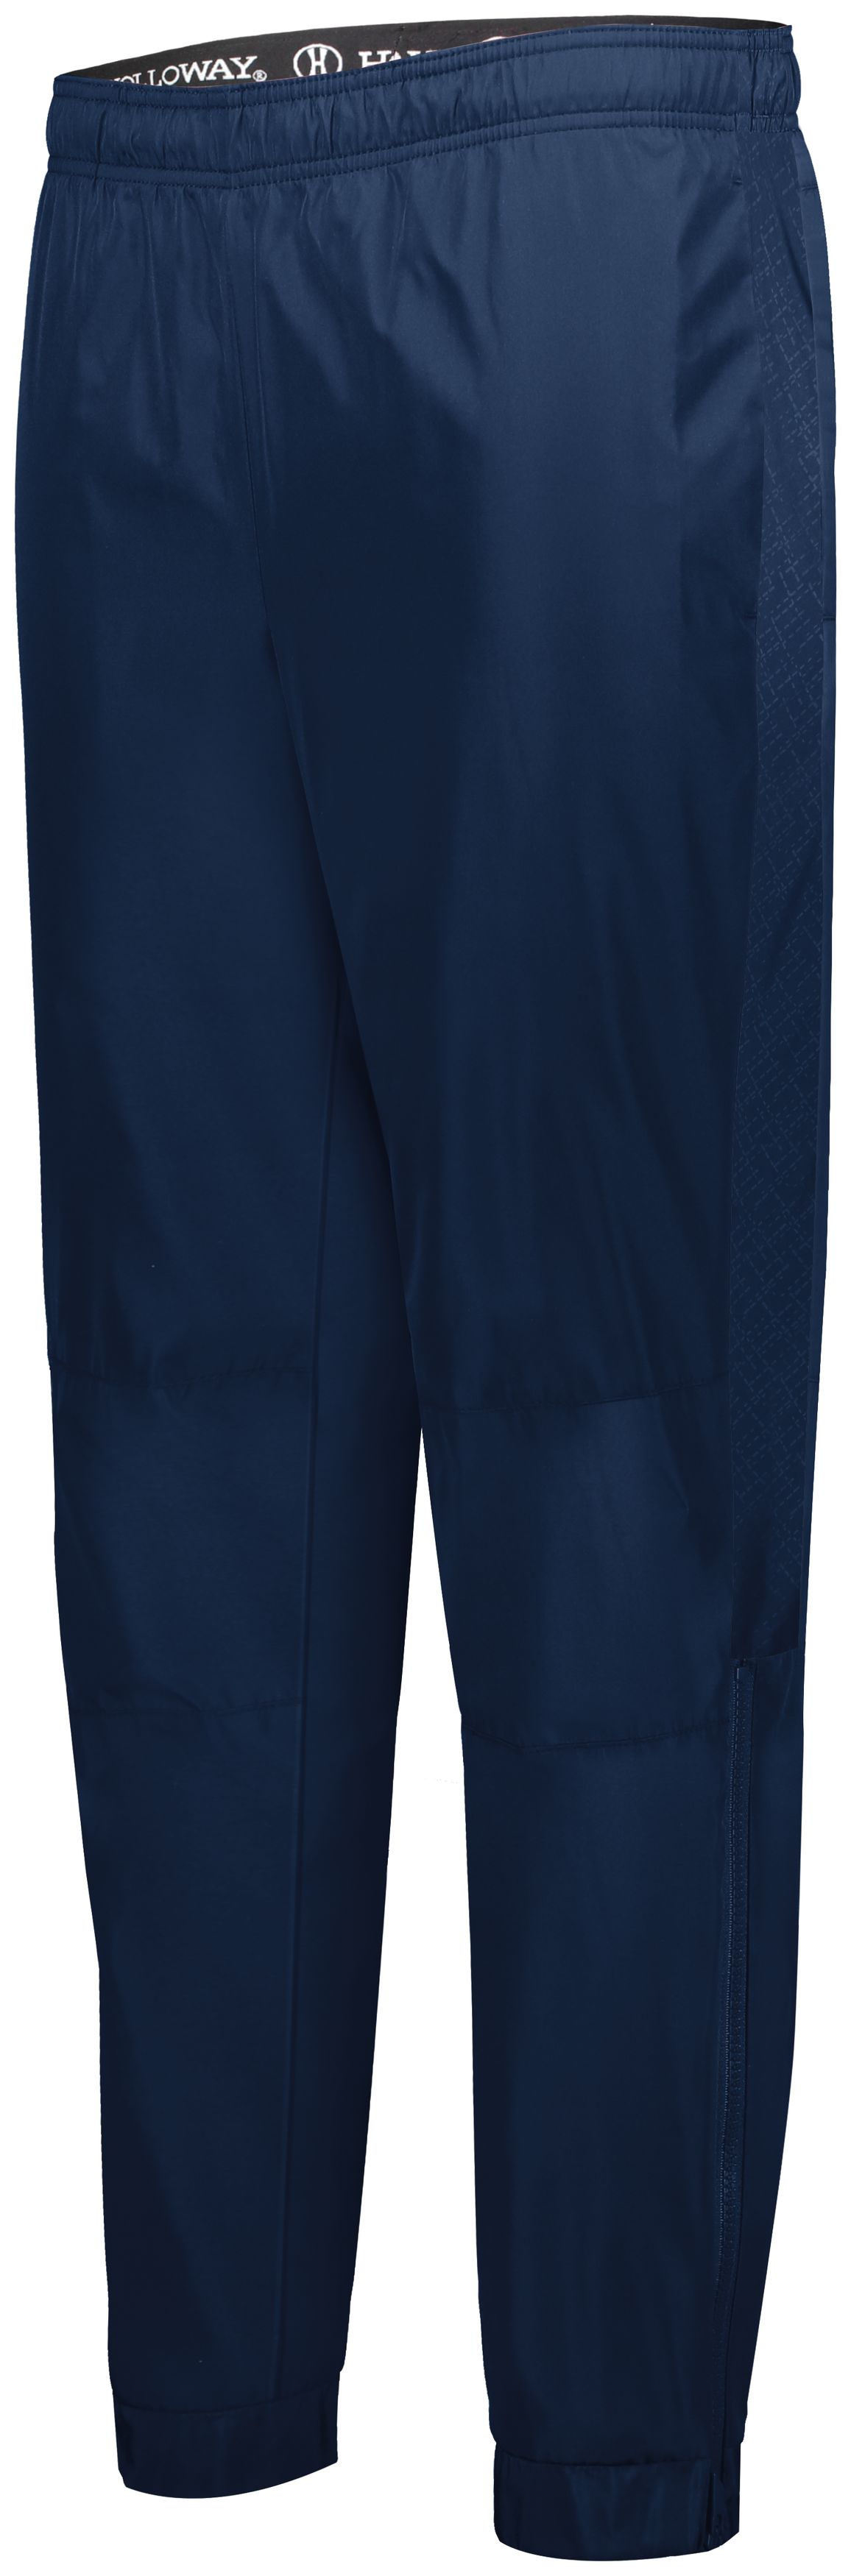 Holloway 229631 - Youth Seriesx Pant